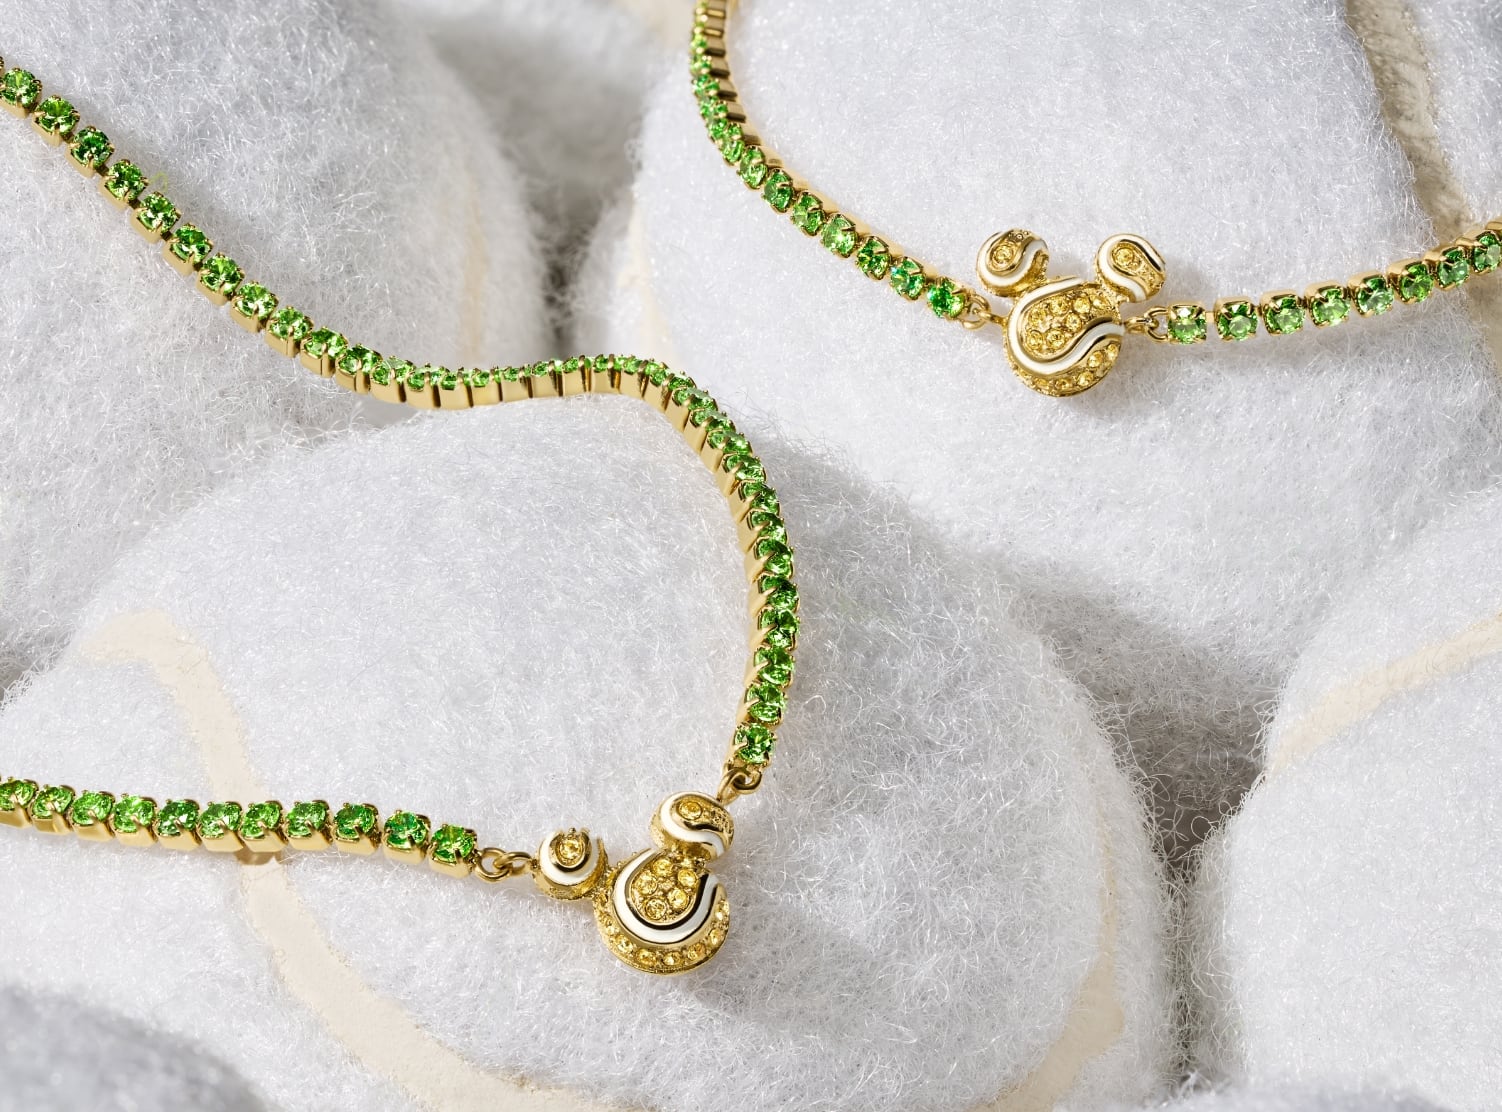 Image shows our Disney Mickey Mouse tennis necklace and bracelet, displayed on white tennis balls. Each piece is embellished with green and yellow pavé crystals. Mickey's silhouette adds a playful accent, reimagined as a trio of sparkling tennis balls.